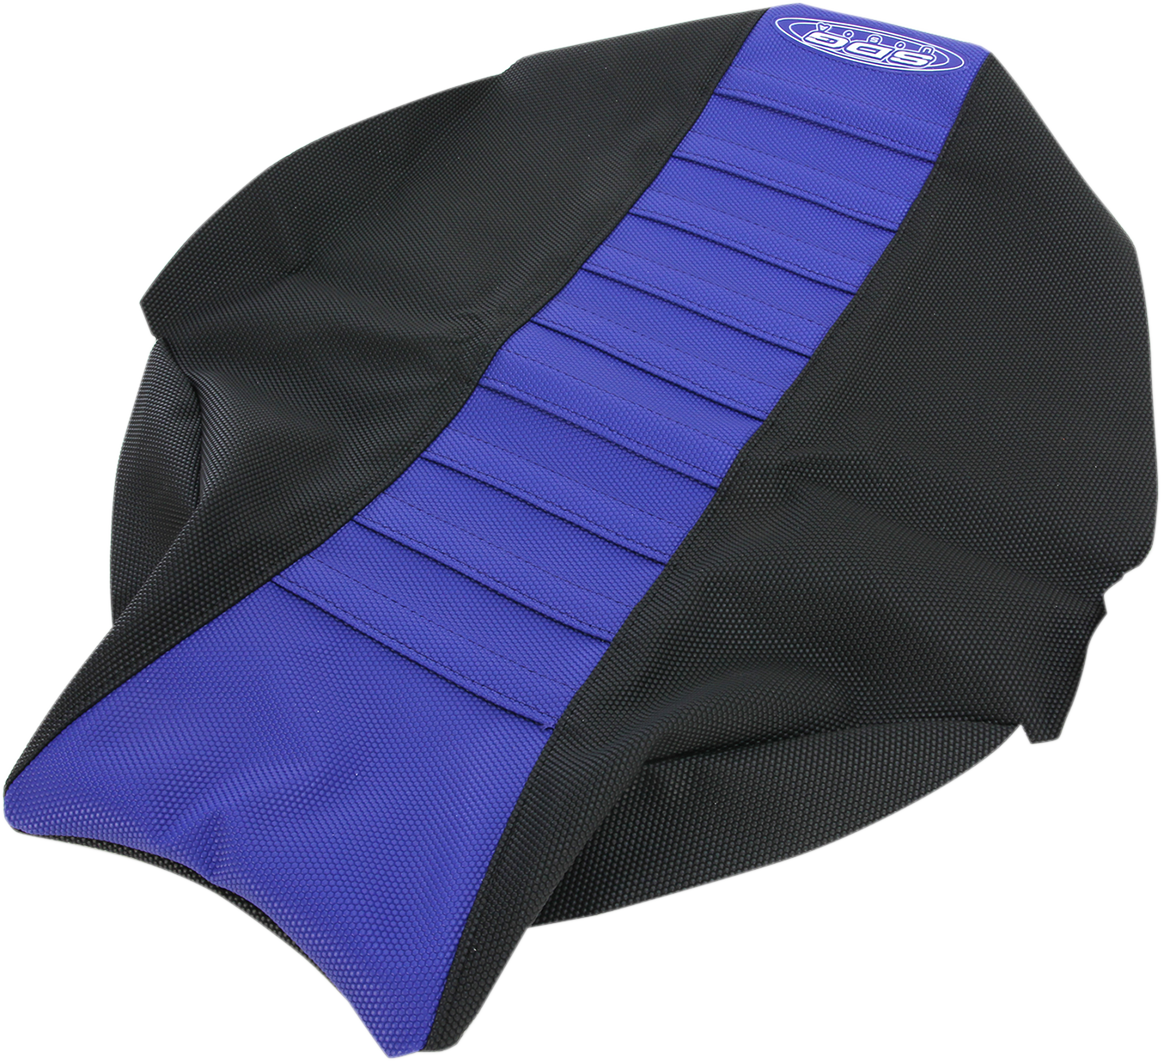 SDG Pleated Seat Cover - Blue Top/Black Sides 96345BK